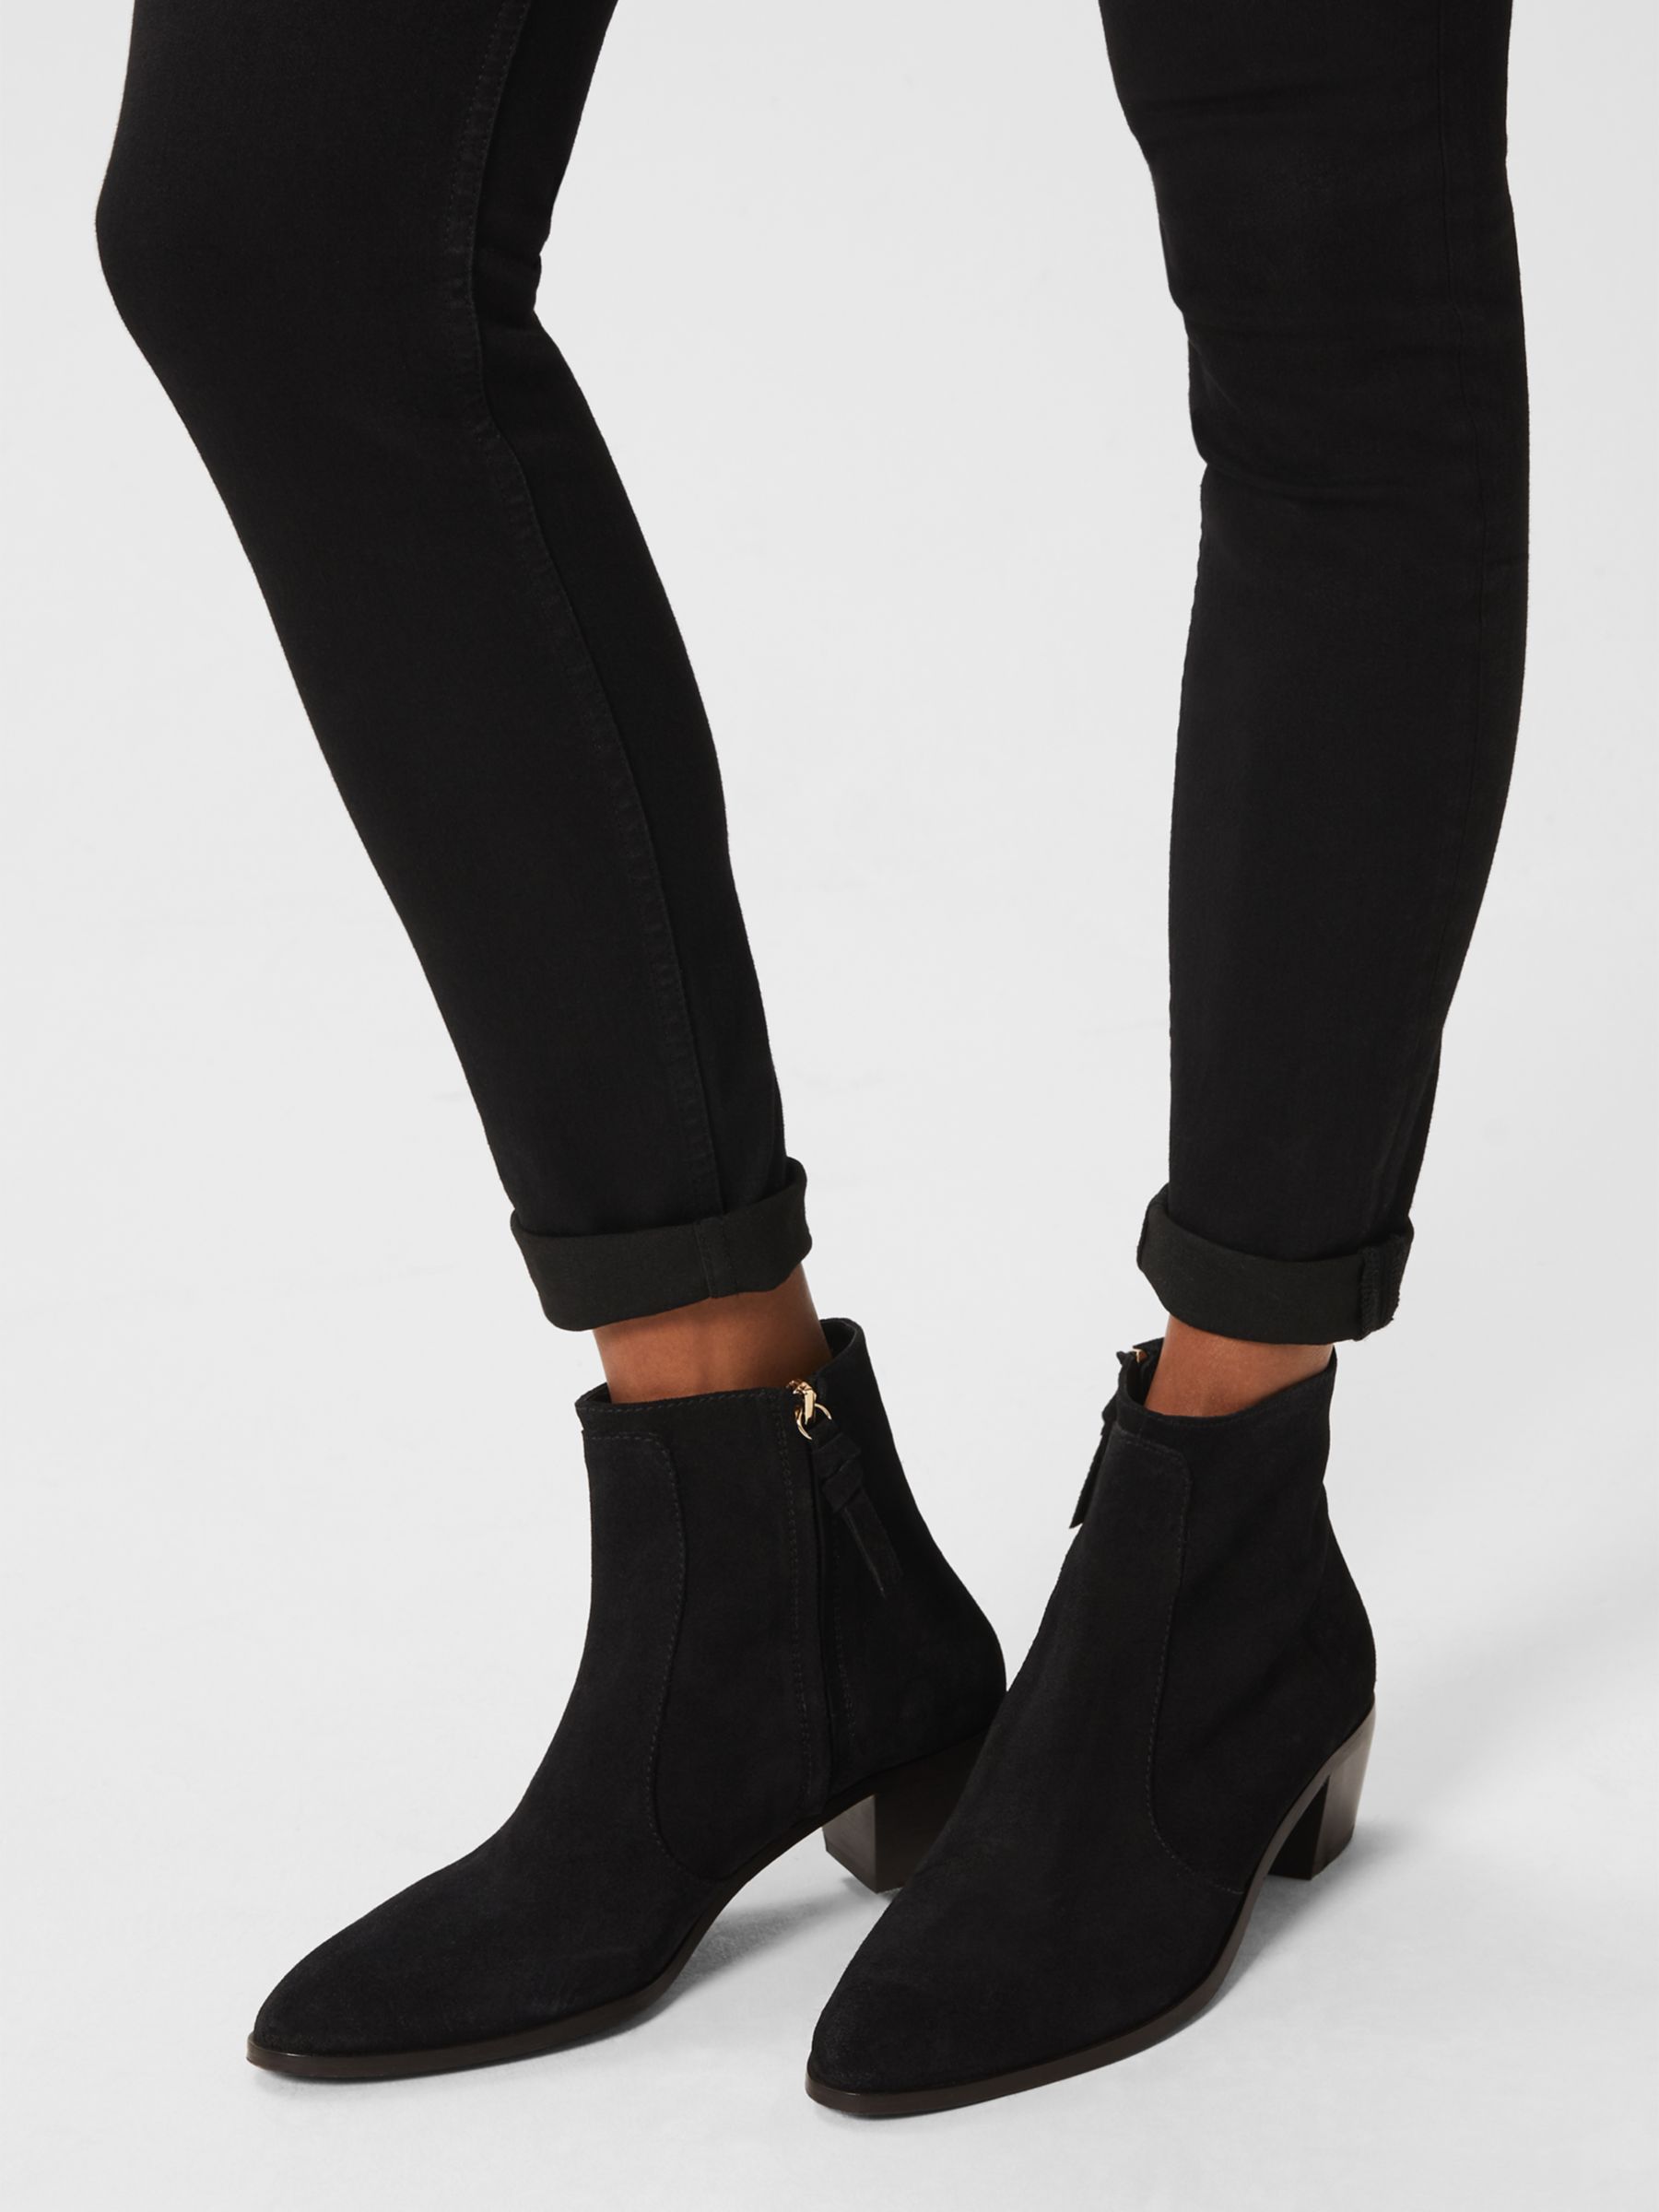 Hobbs Shona Suede Ankle Boots, Black at John Lewis & Partners